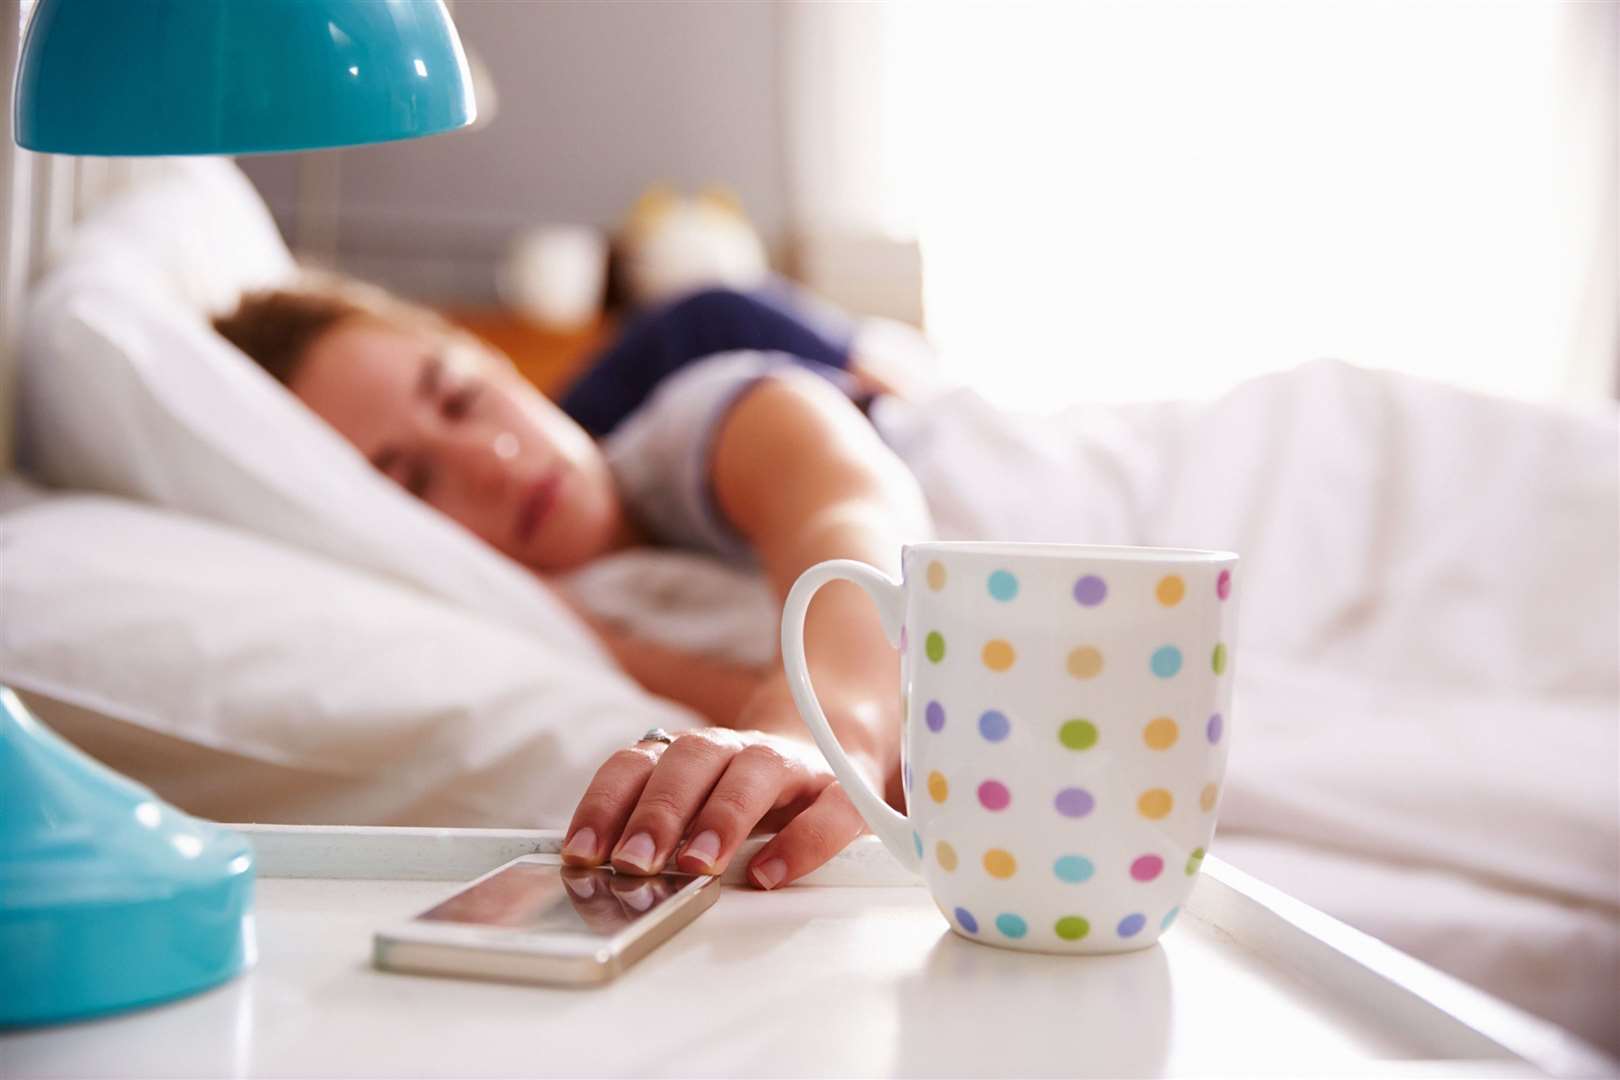 We had an hour less in bed this morning Picture: PA Photo/thinkstockphotos